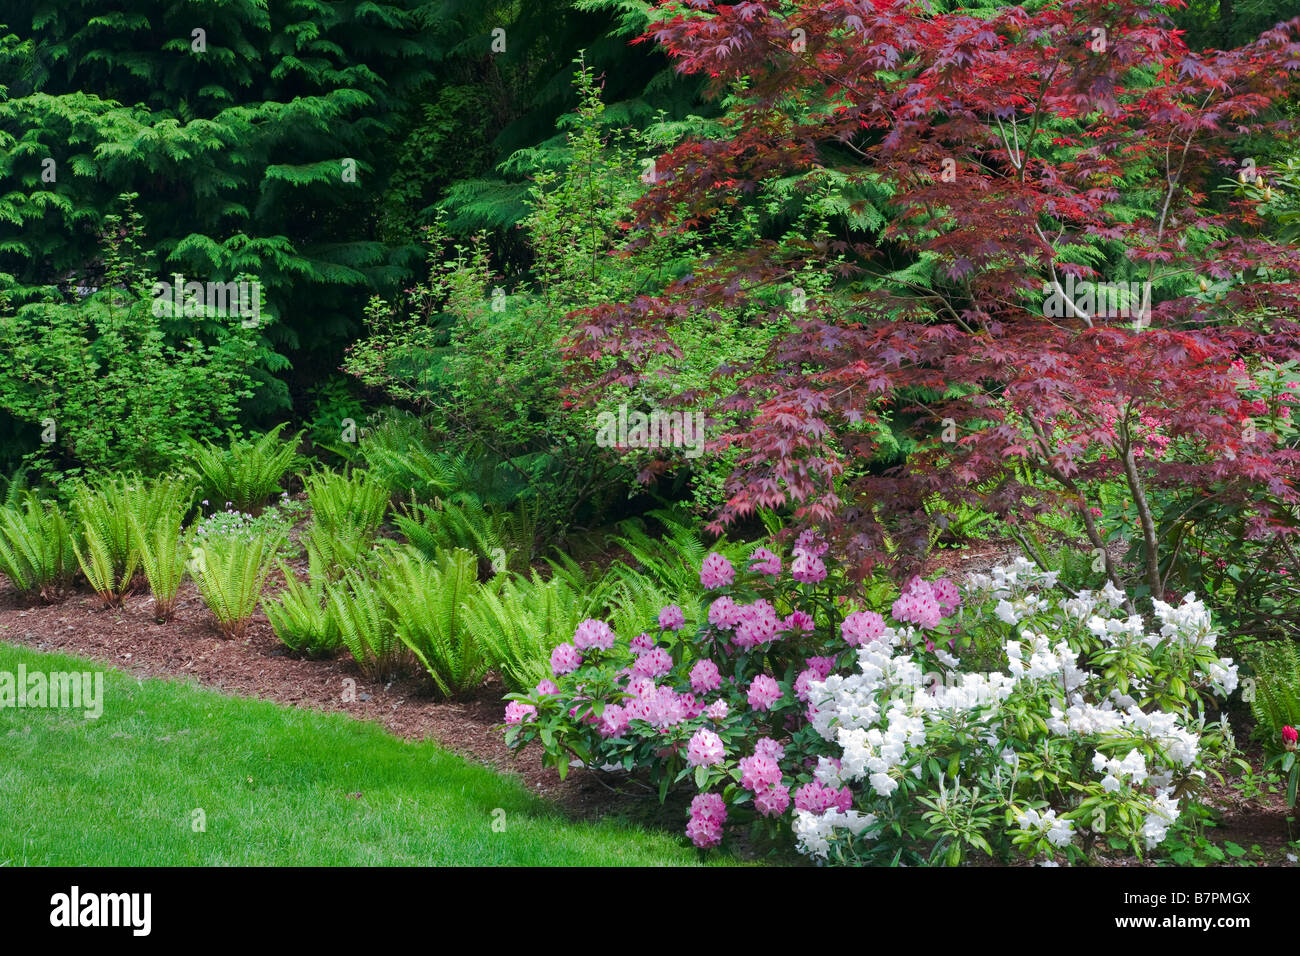 Vashon Island WA: Pacific Northwest forest garden featuring flowering rhododendrons Japanese maples and sword ferns Stock Photo